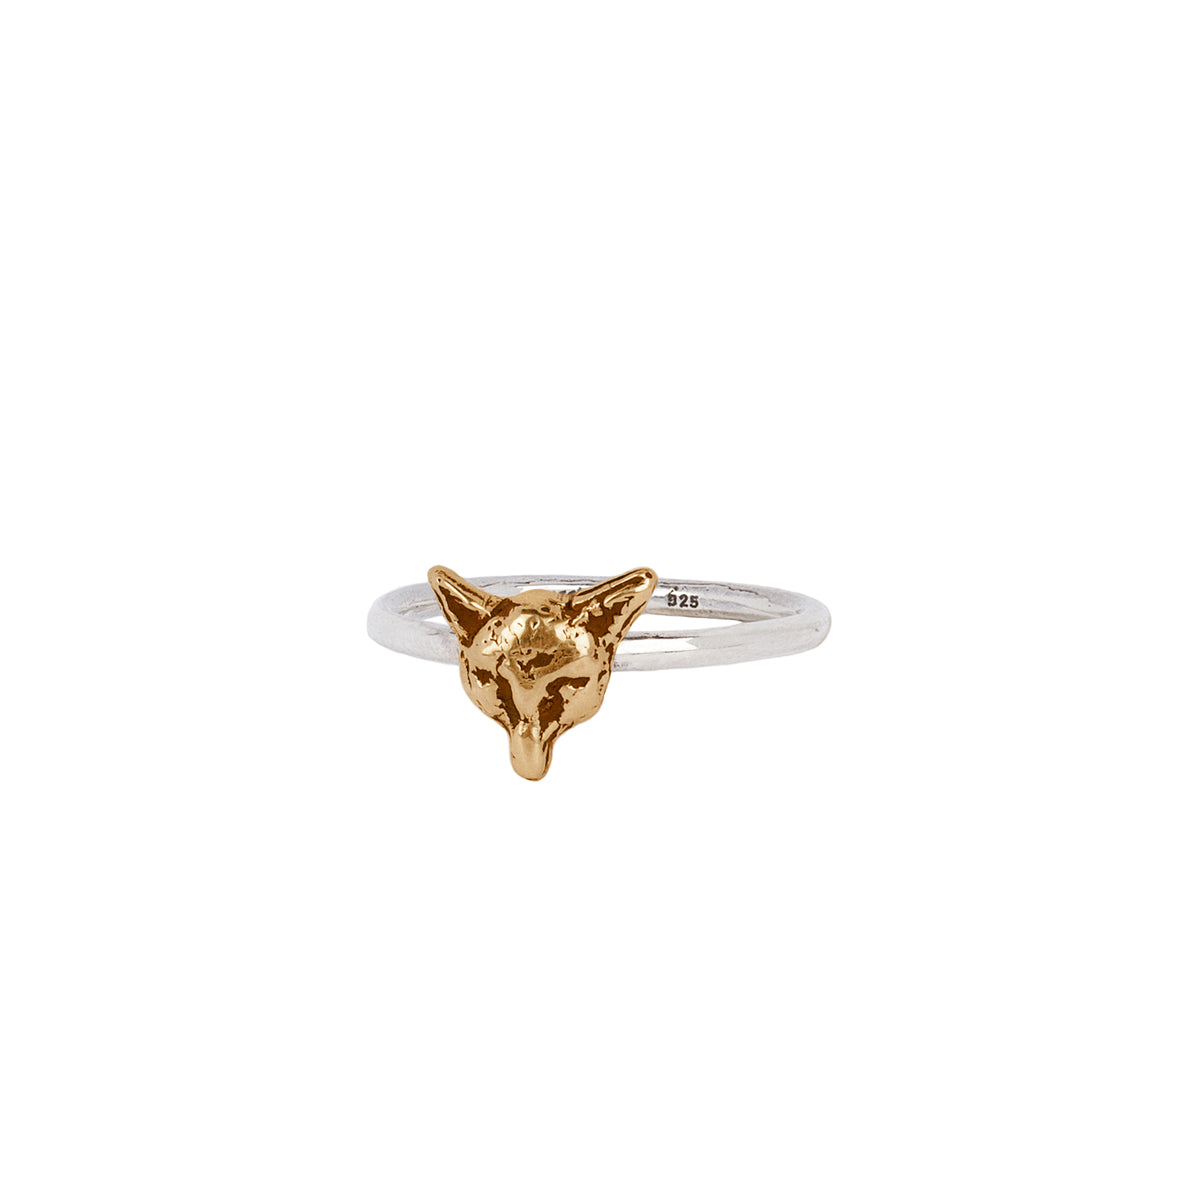 A bronze ring with our Fox symbol charm.